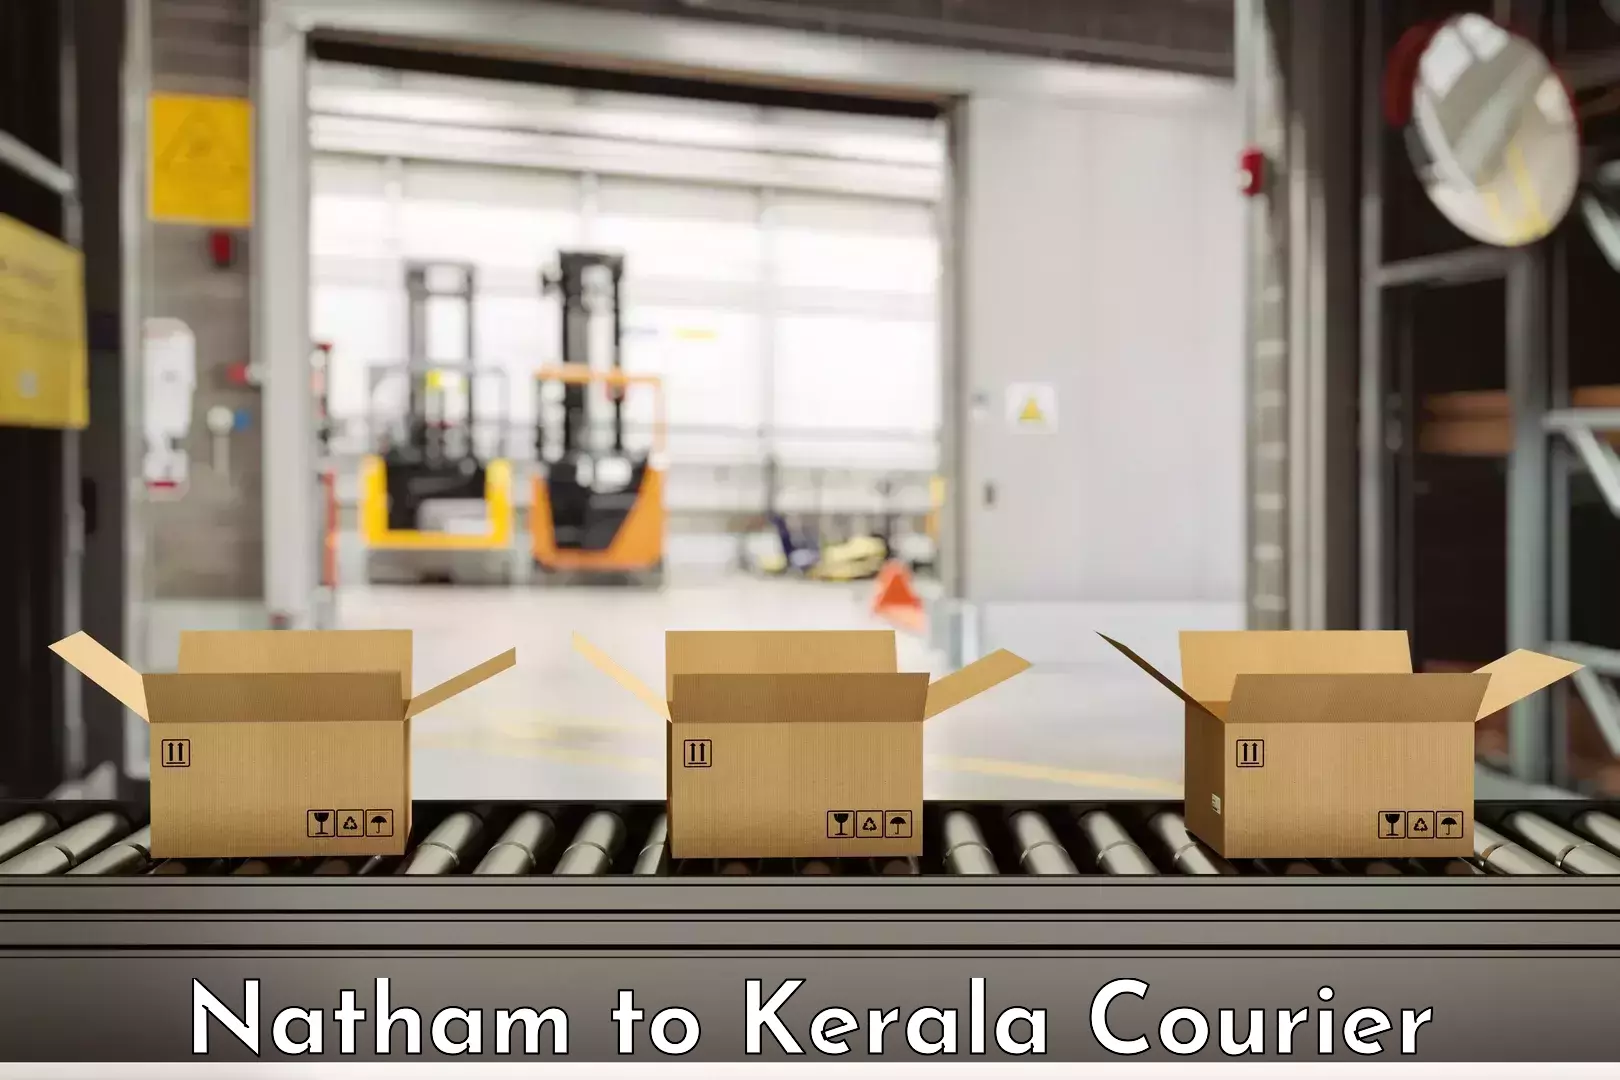 Furniture delivery service Natham to Kochi